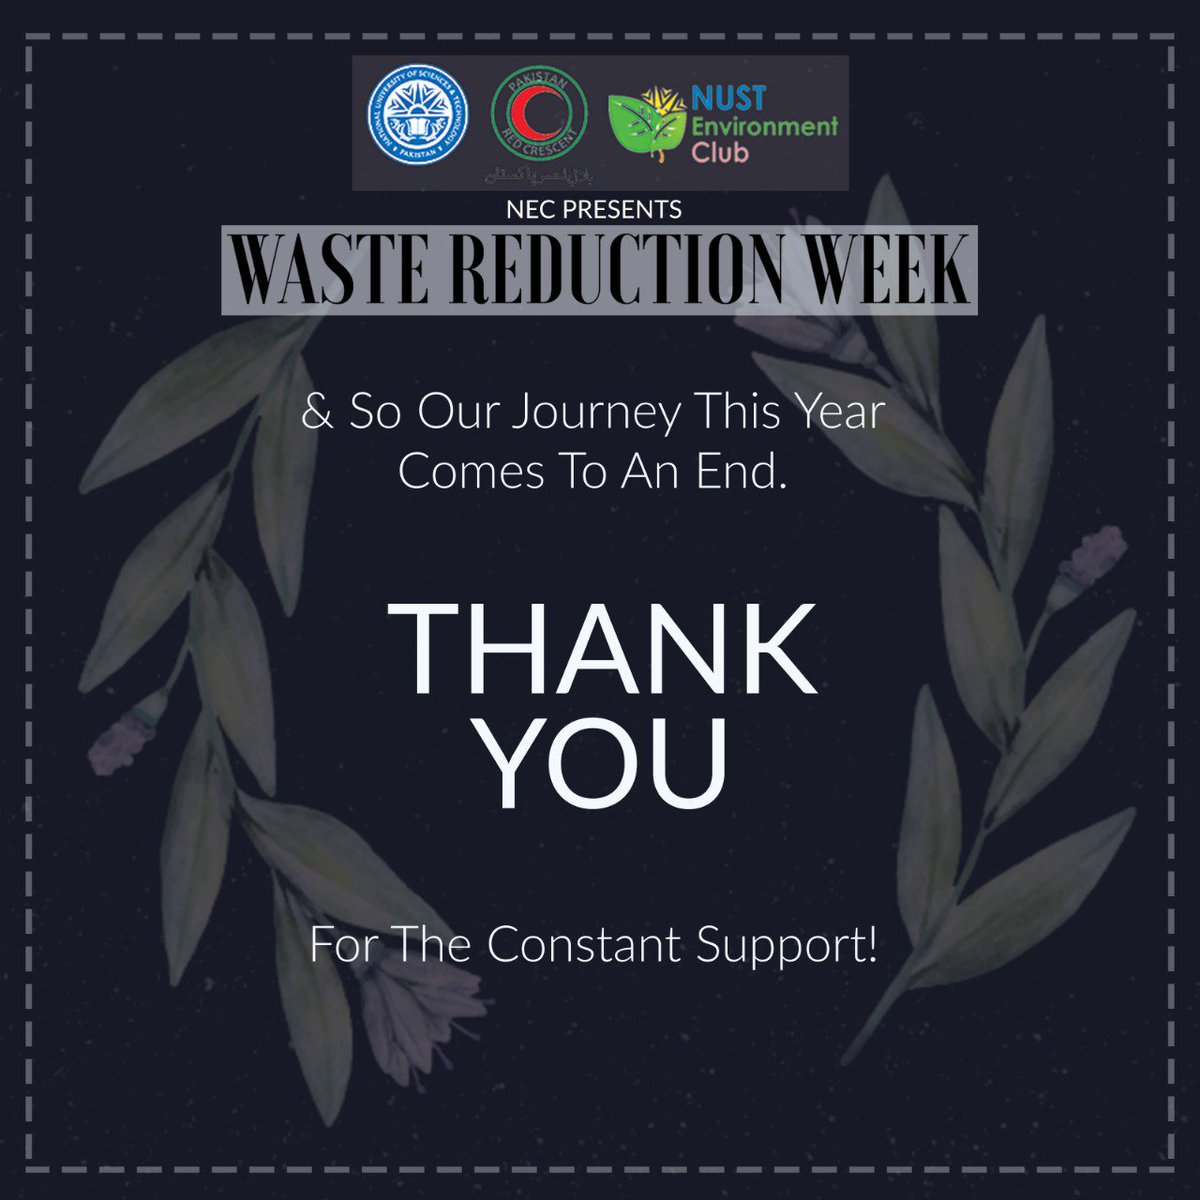 We tried to make a difference. We had fun along the way.

Thank you so much for sticking around with us trying to make this world a better place. It was quite the year, and we enjoyed every bit of it.

#WasteReductionWeek #OwnYourEnvironment #NEC